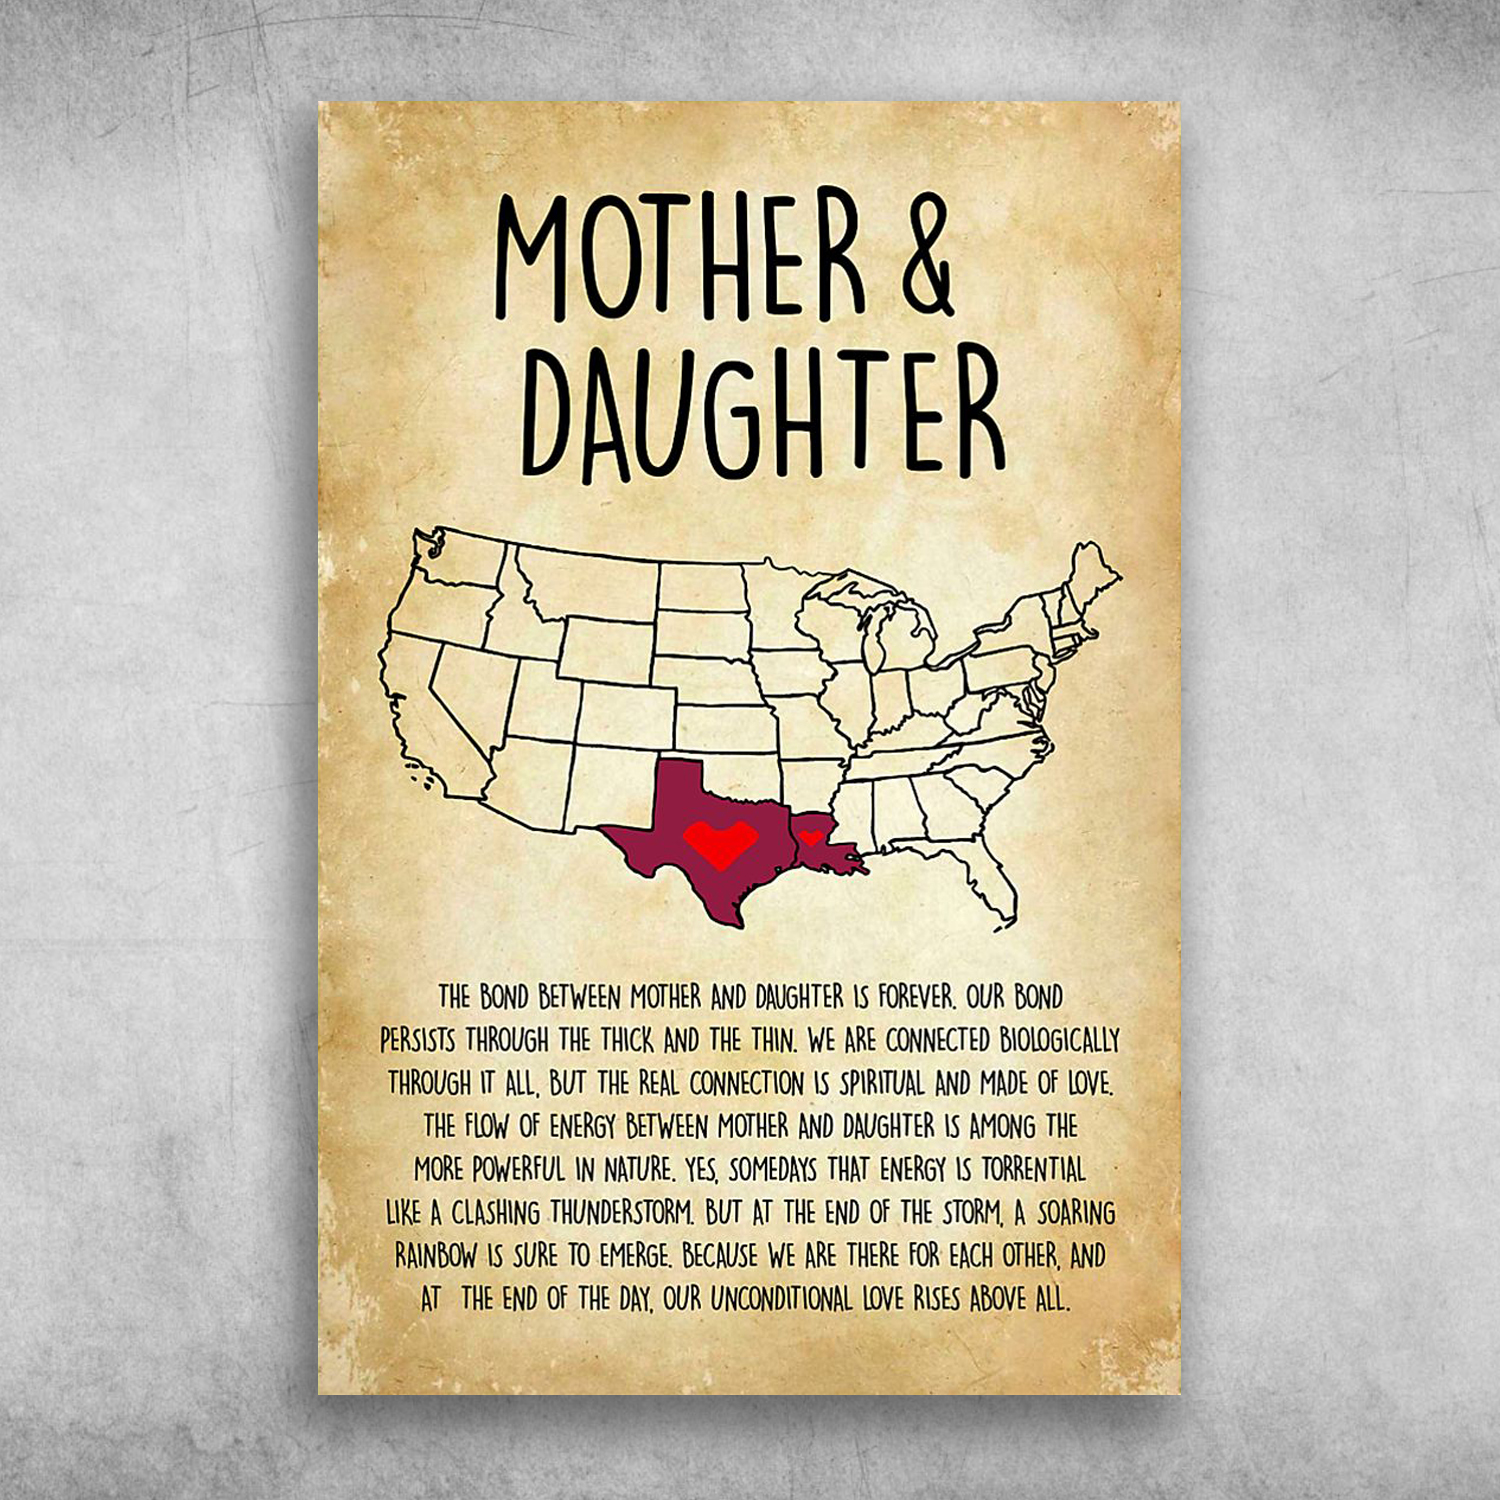 Mother And Daughter Like Louisiana And Texas America